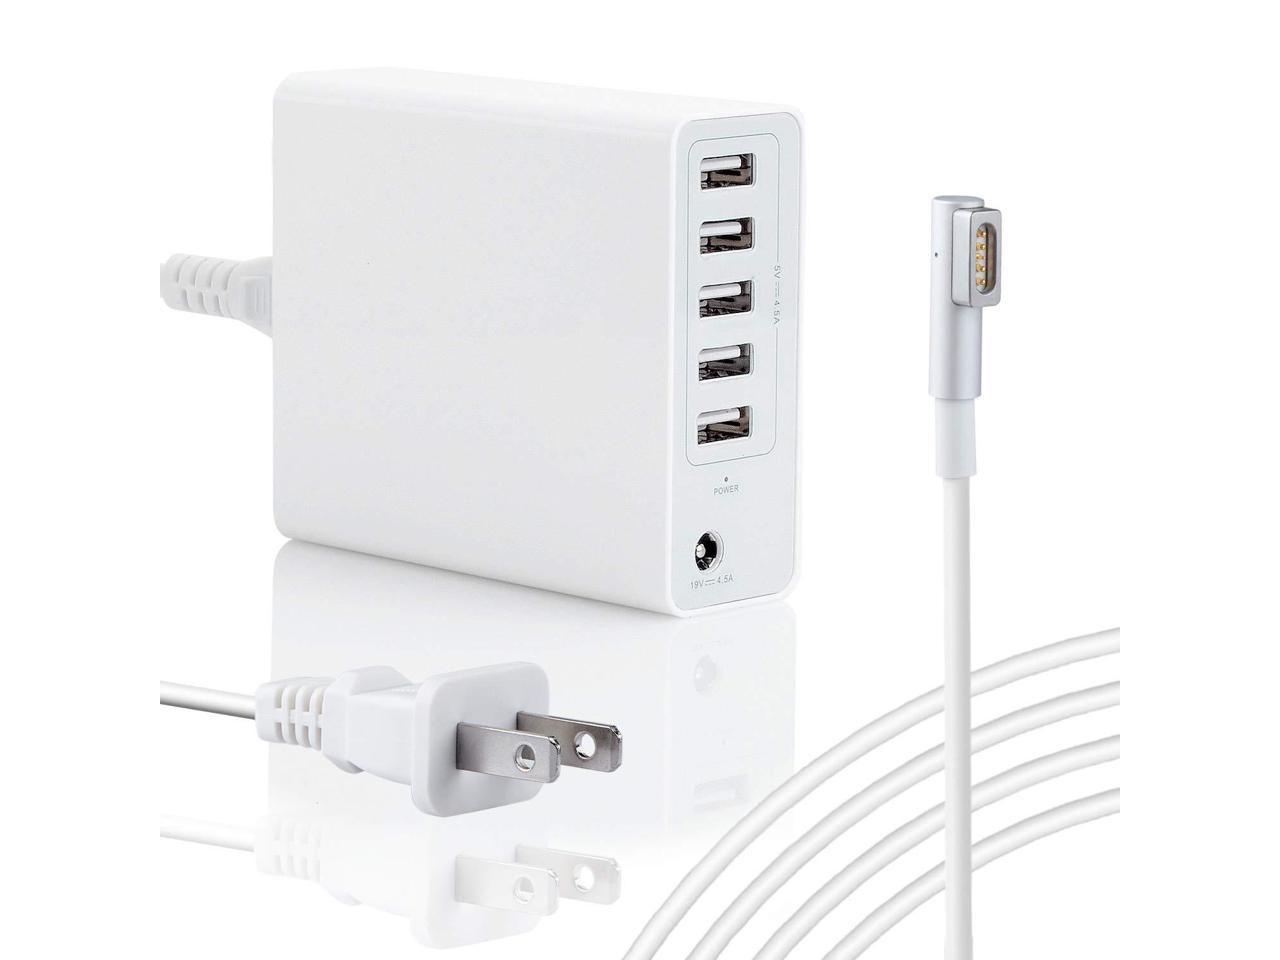 85w Charger For Apple Macbook Pro 15 17 Inch Made Before Mid 12 Replacement For Magsafe 1 Power Adapter W 5usb Ports Newegg Com